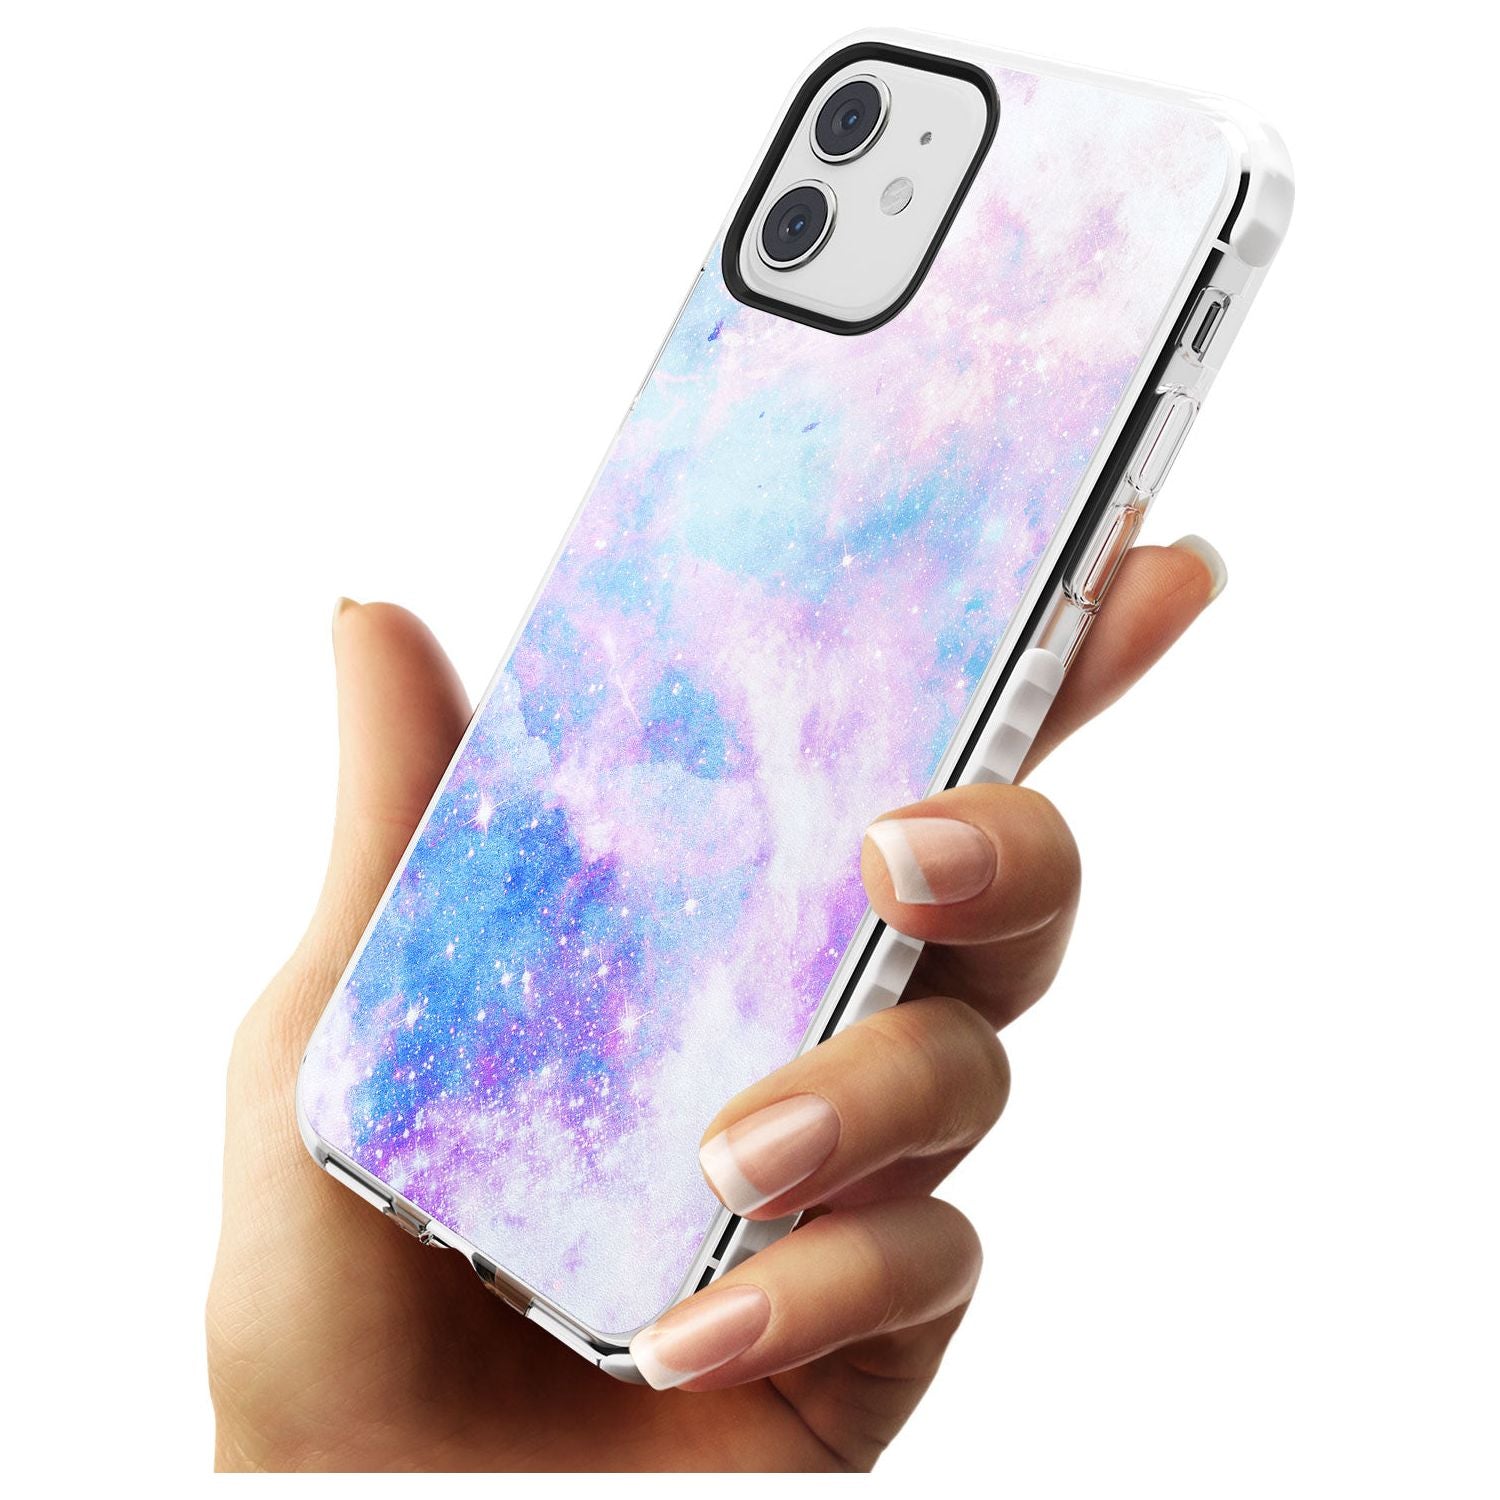 Light Blue Galaxy Pattern Design Impact Phone Case for iPhone 11